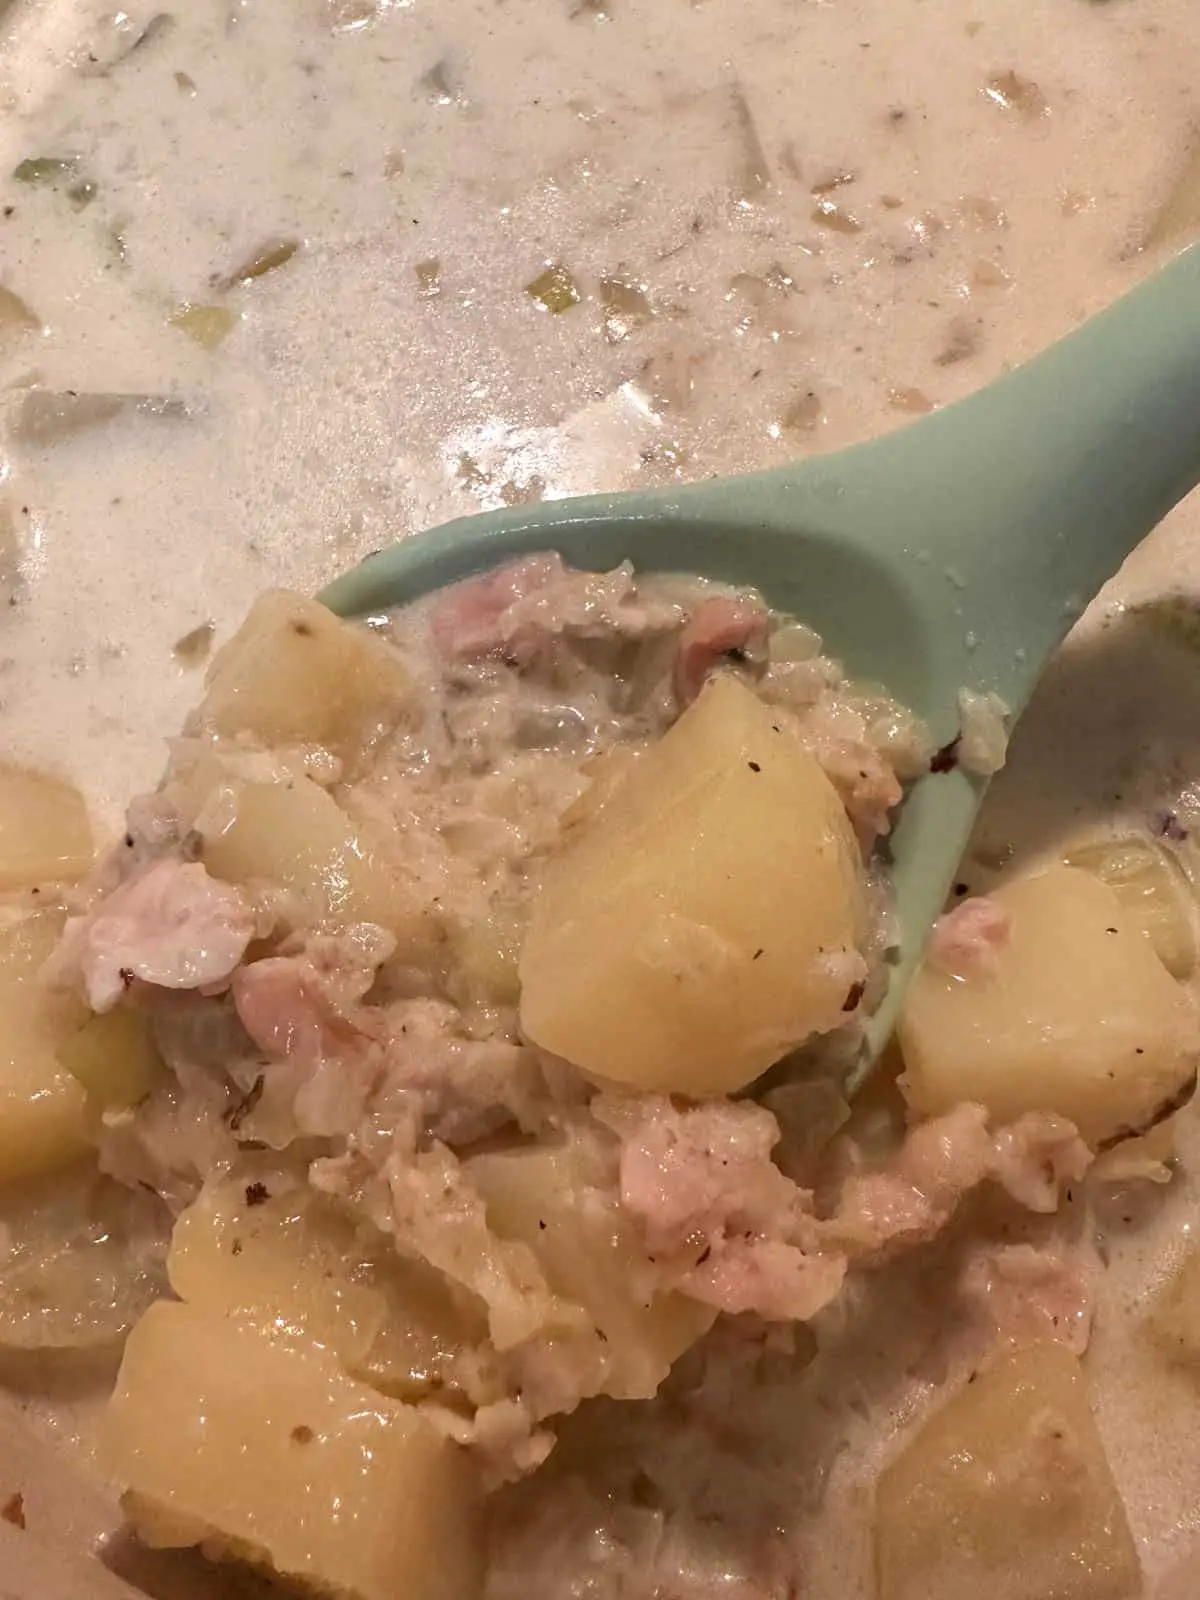 New England Clam Chowder in a Dutch oven. There is a blue spoon containing some of the chowder showing off clams and potatoes.